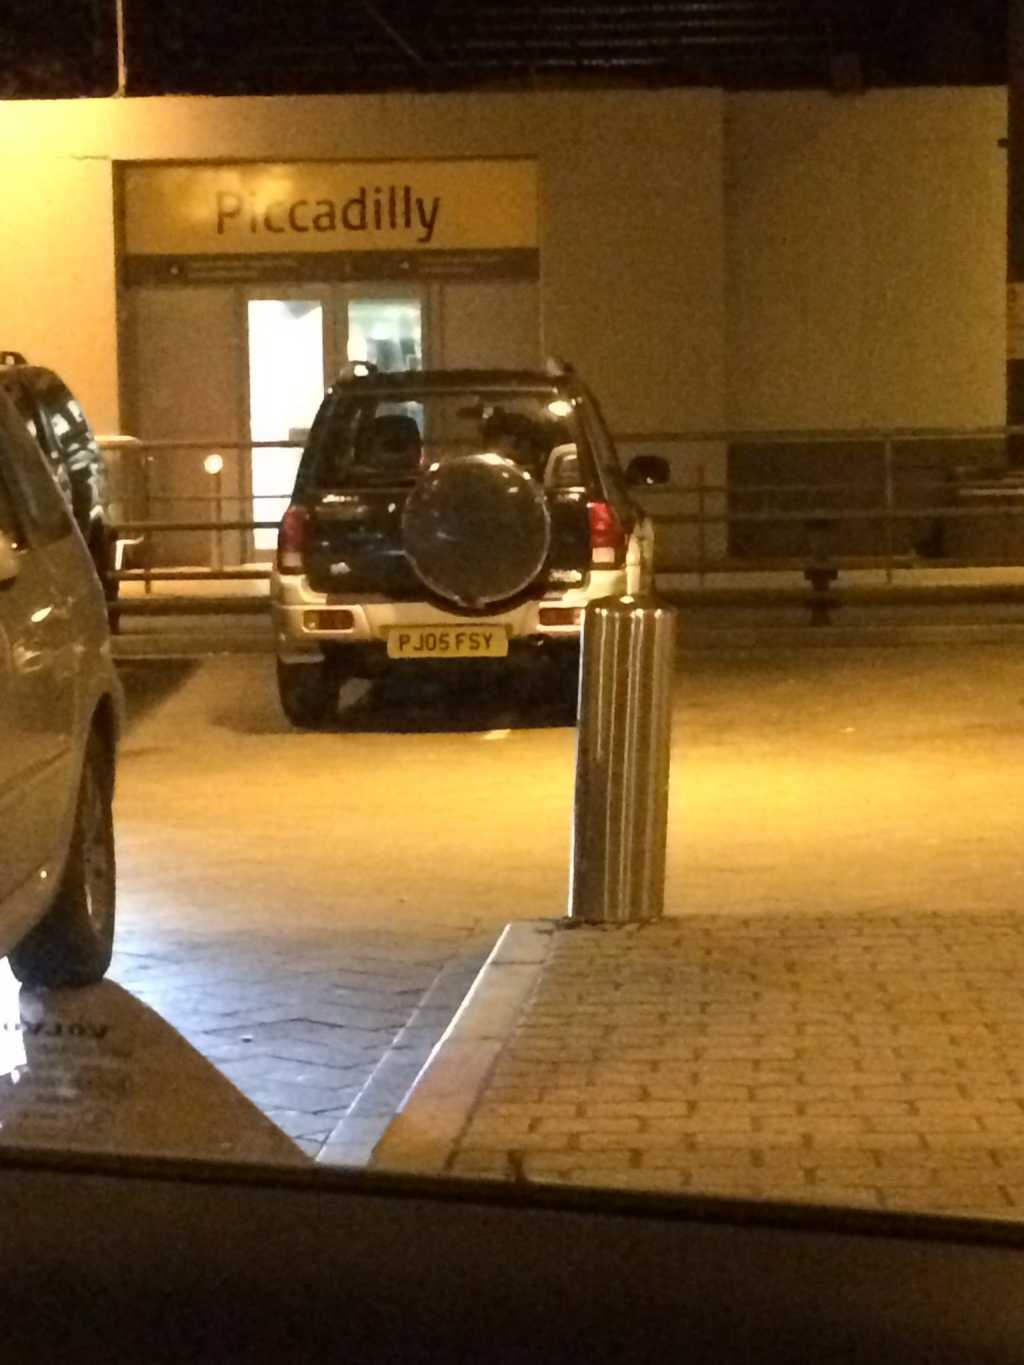 PJ05 FSY is an Inconsiderate Parker